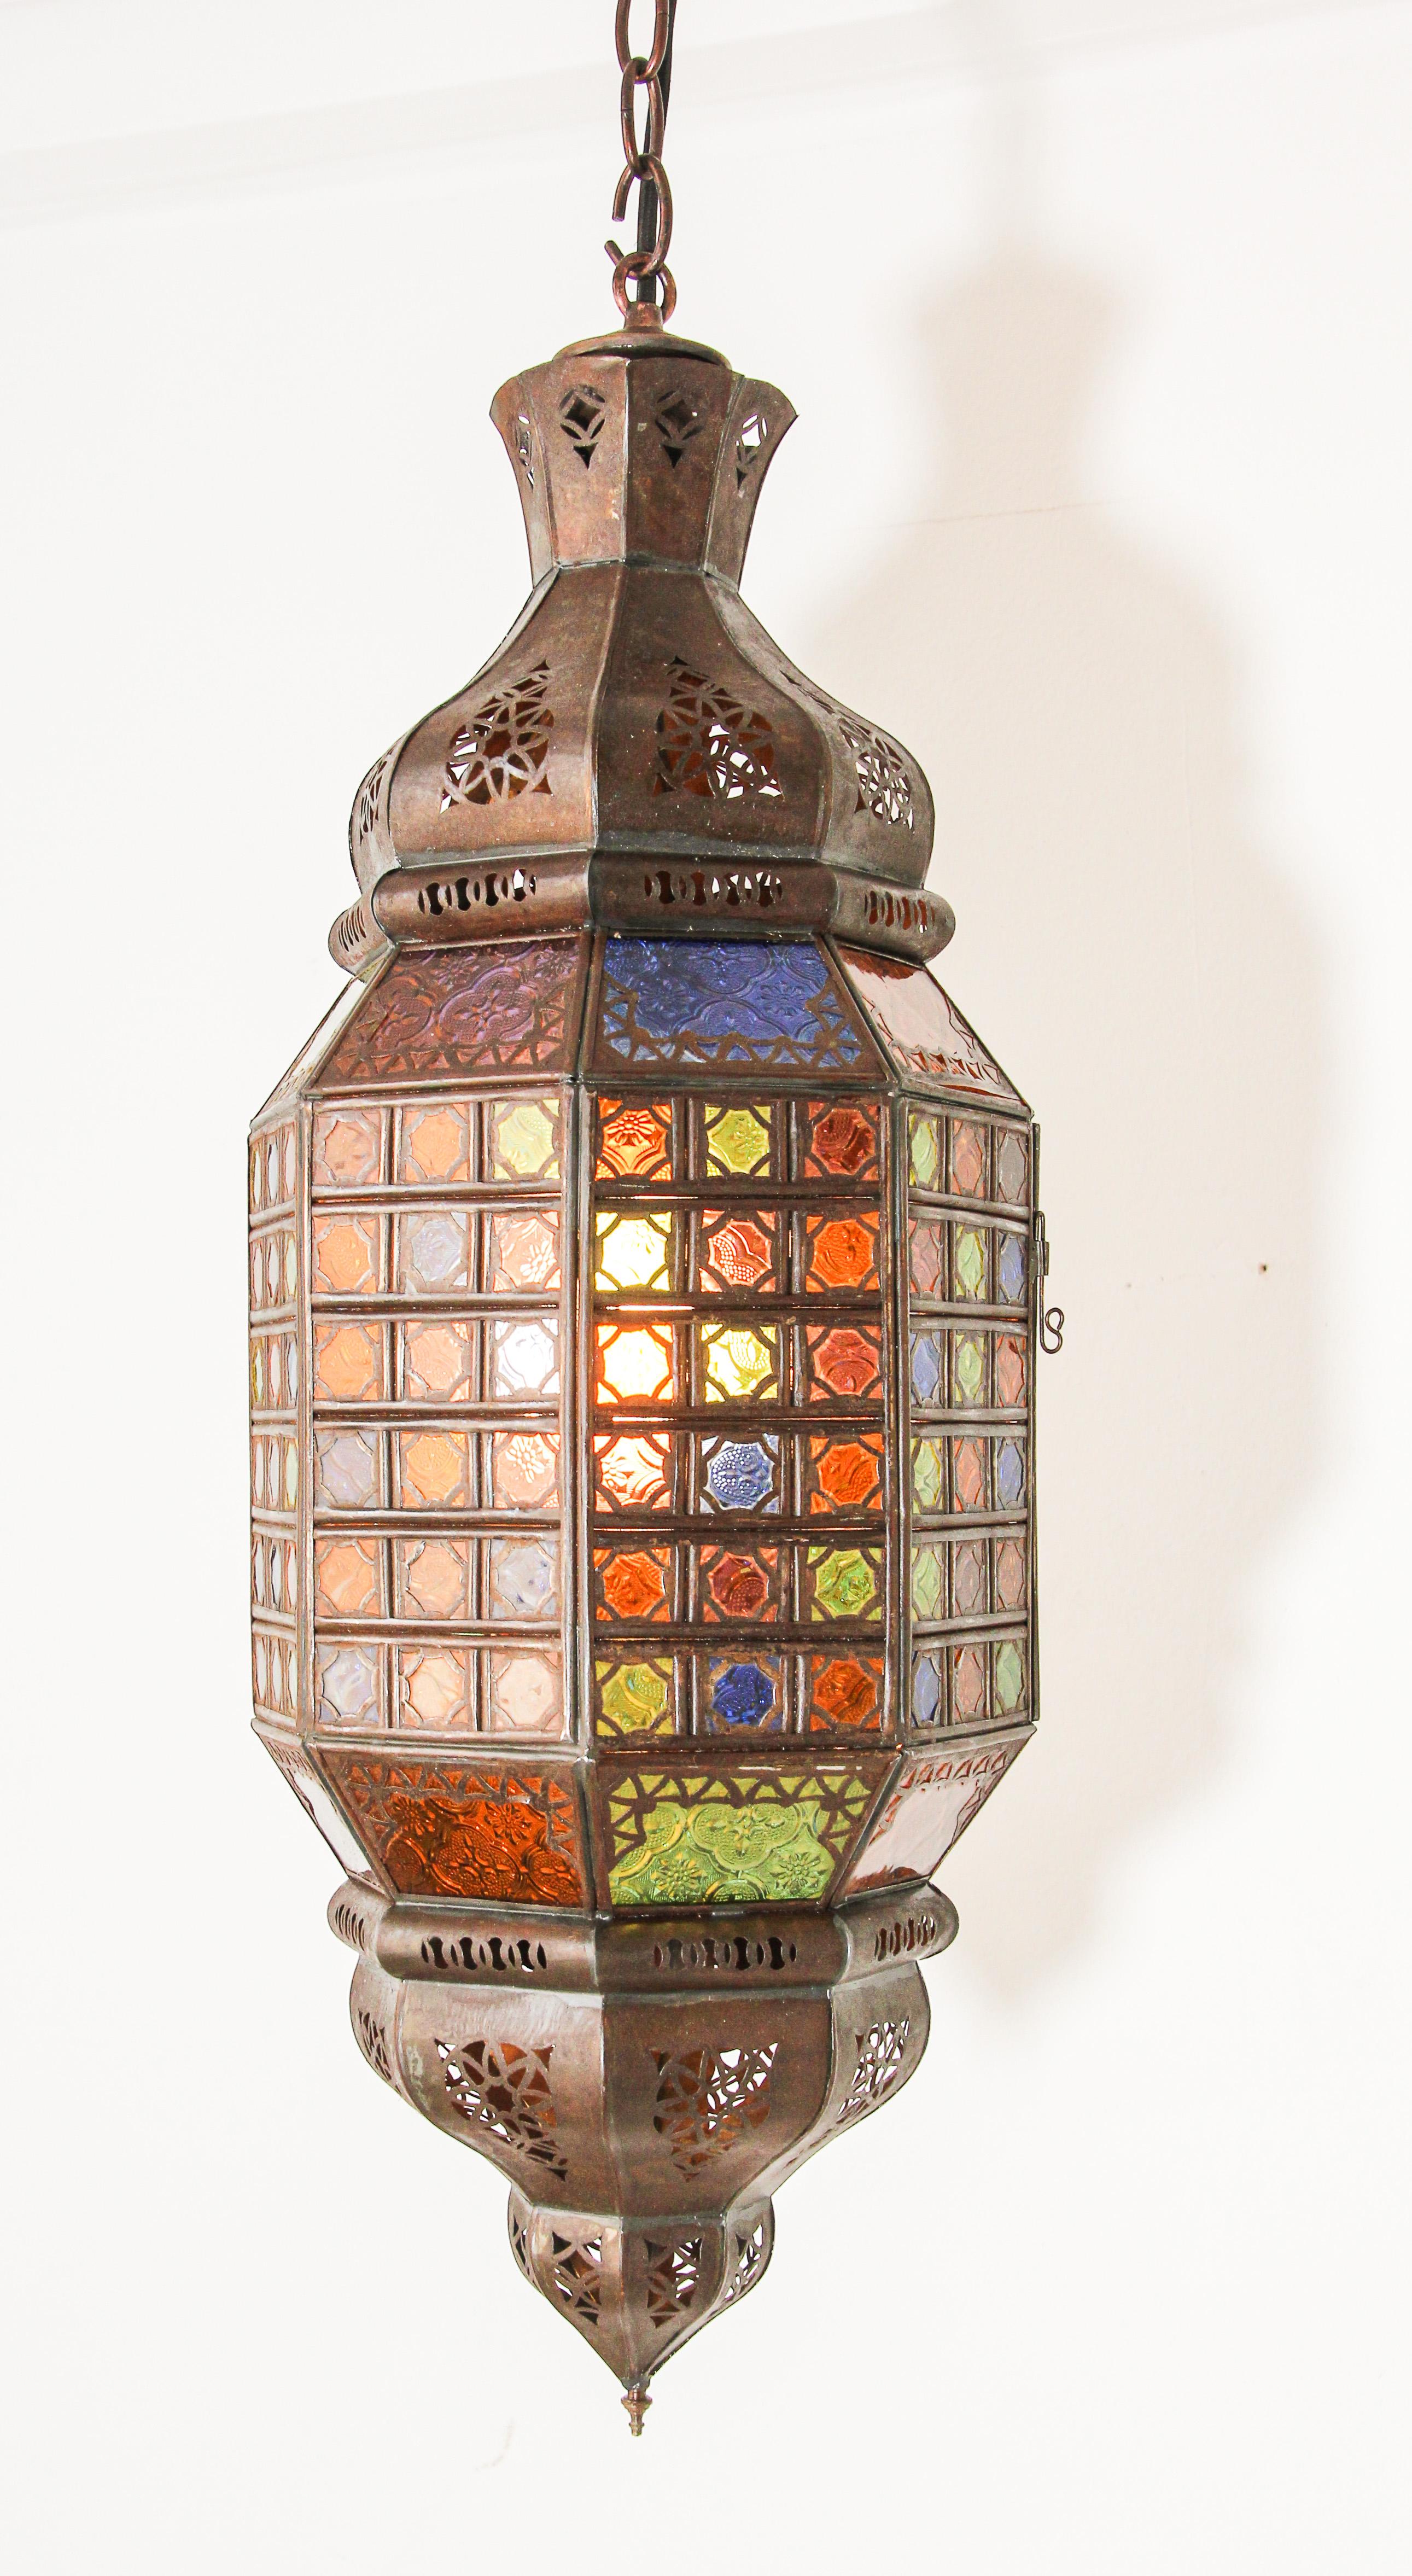 Stylish handcrafted Moroccan pendant light fixture with multi-color molded Moorish glass and metal with an antique rust finish.
Bohemian style metal and glass lantern with dozens of small cut-glass with Moorish openwork filigree metal design in